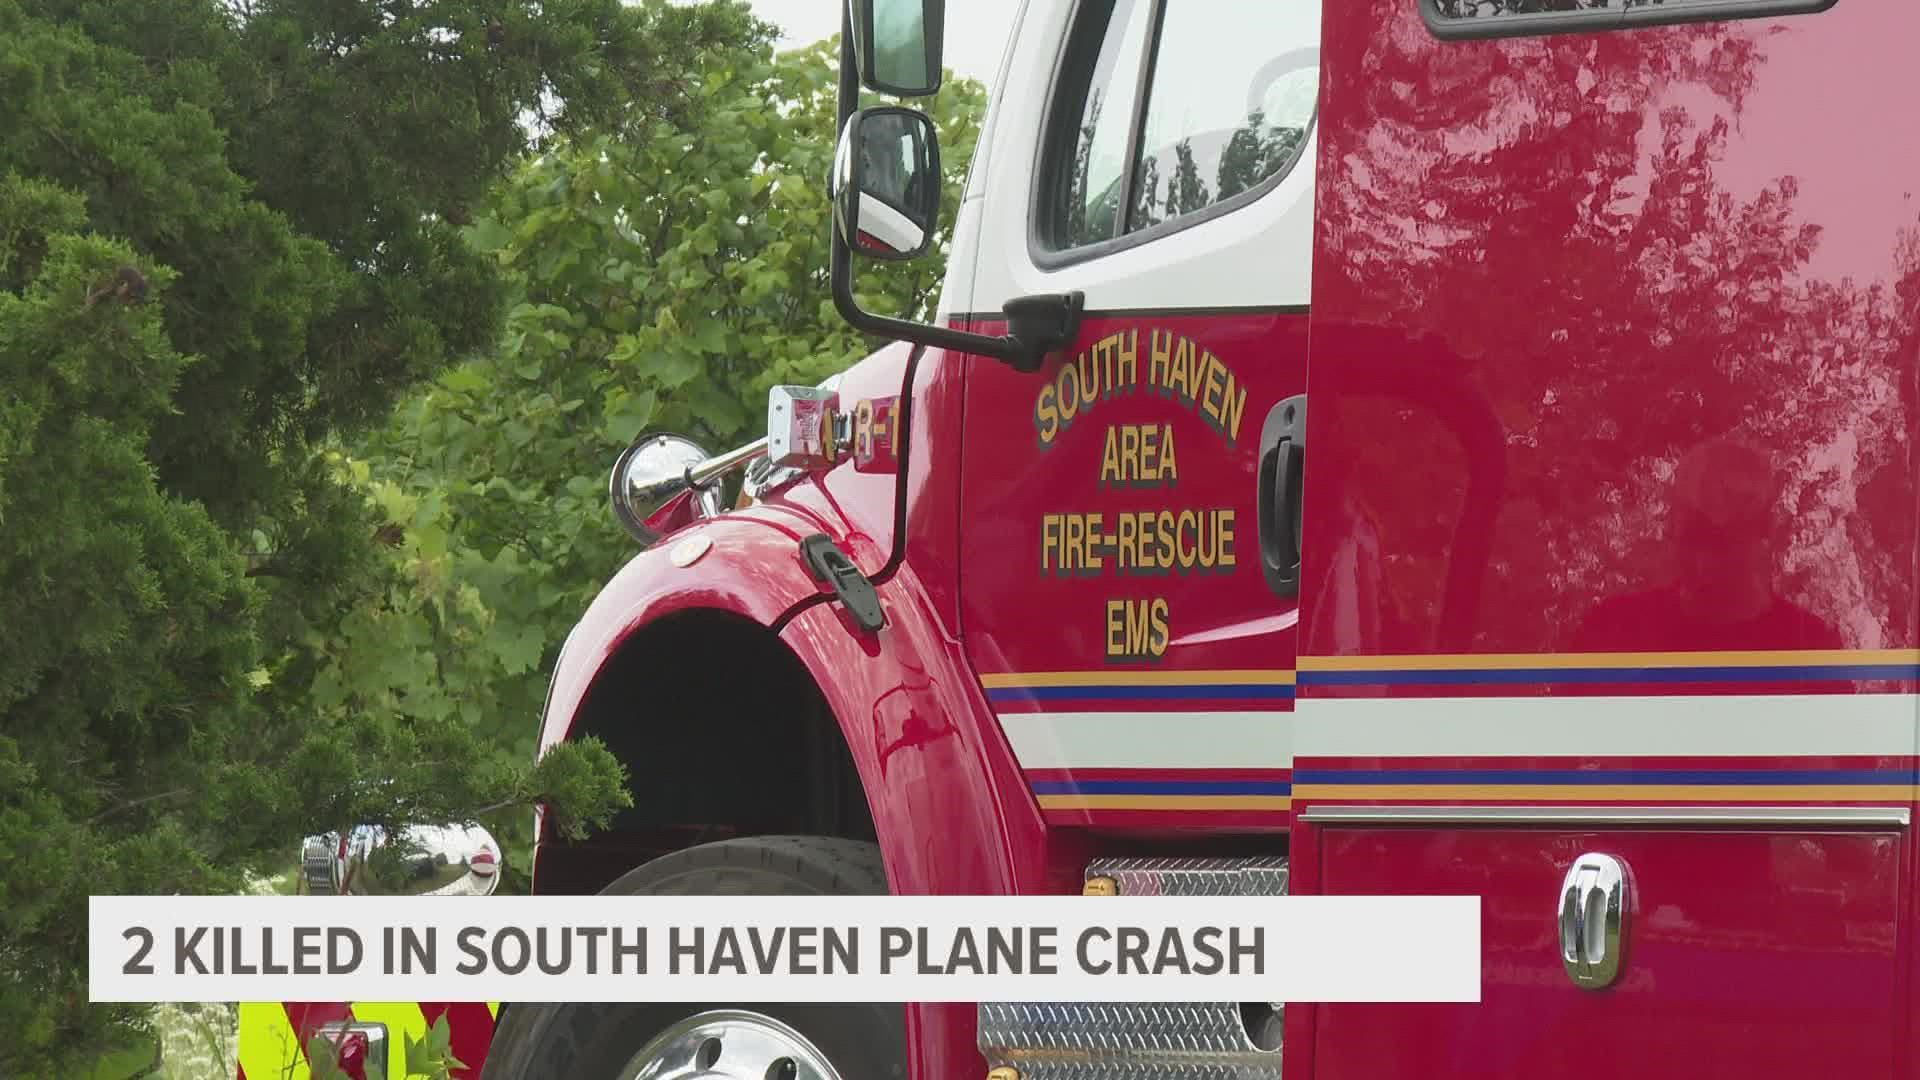 The wreckage of the plane was located early Wednesday morning about a mile north of the South Haven Regional Airport. Both occupants were found dead at the scene.